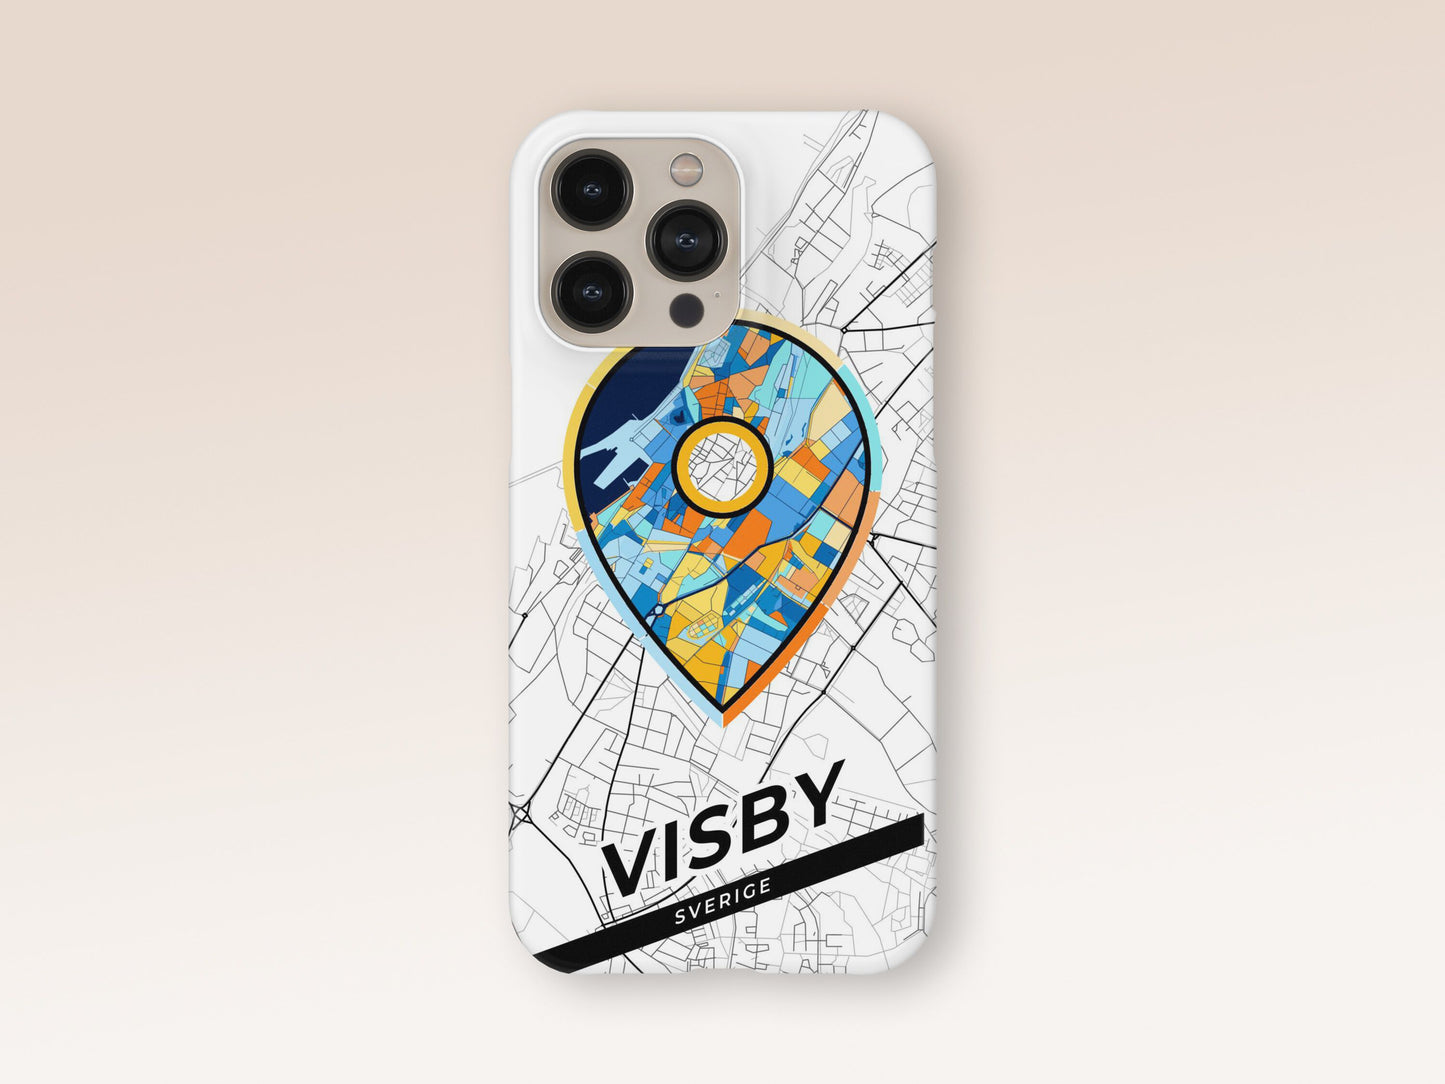 Visby Sweden slim phone case with colorful icon 1